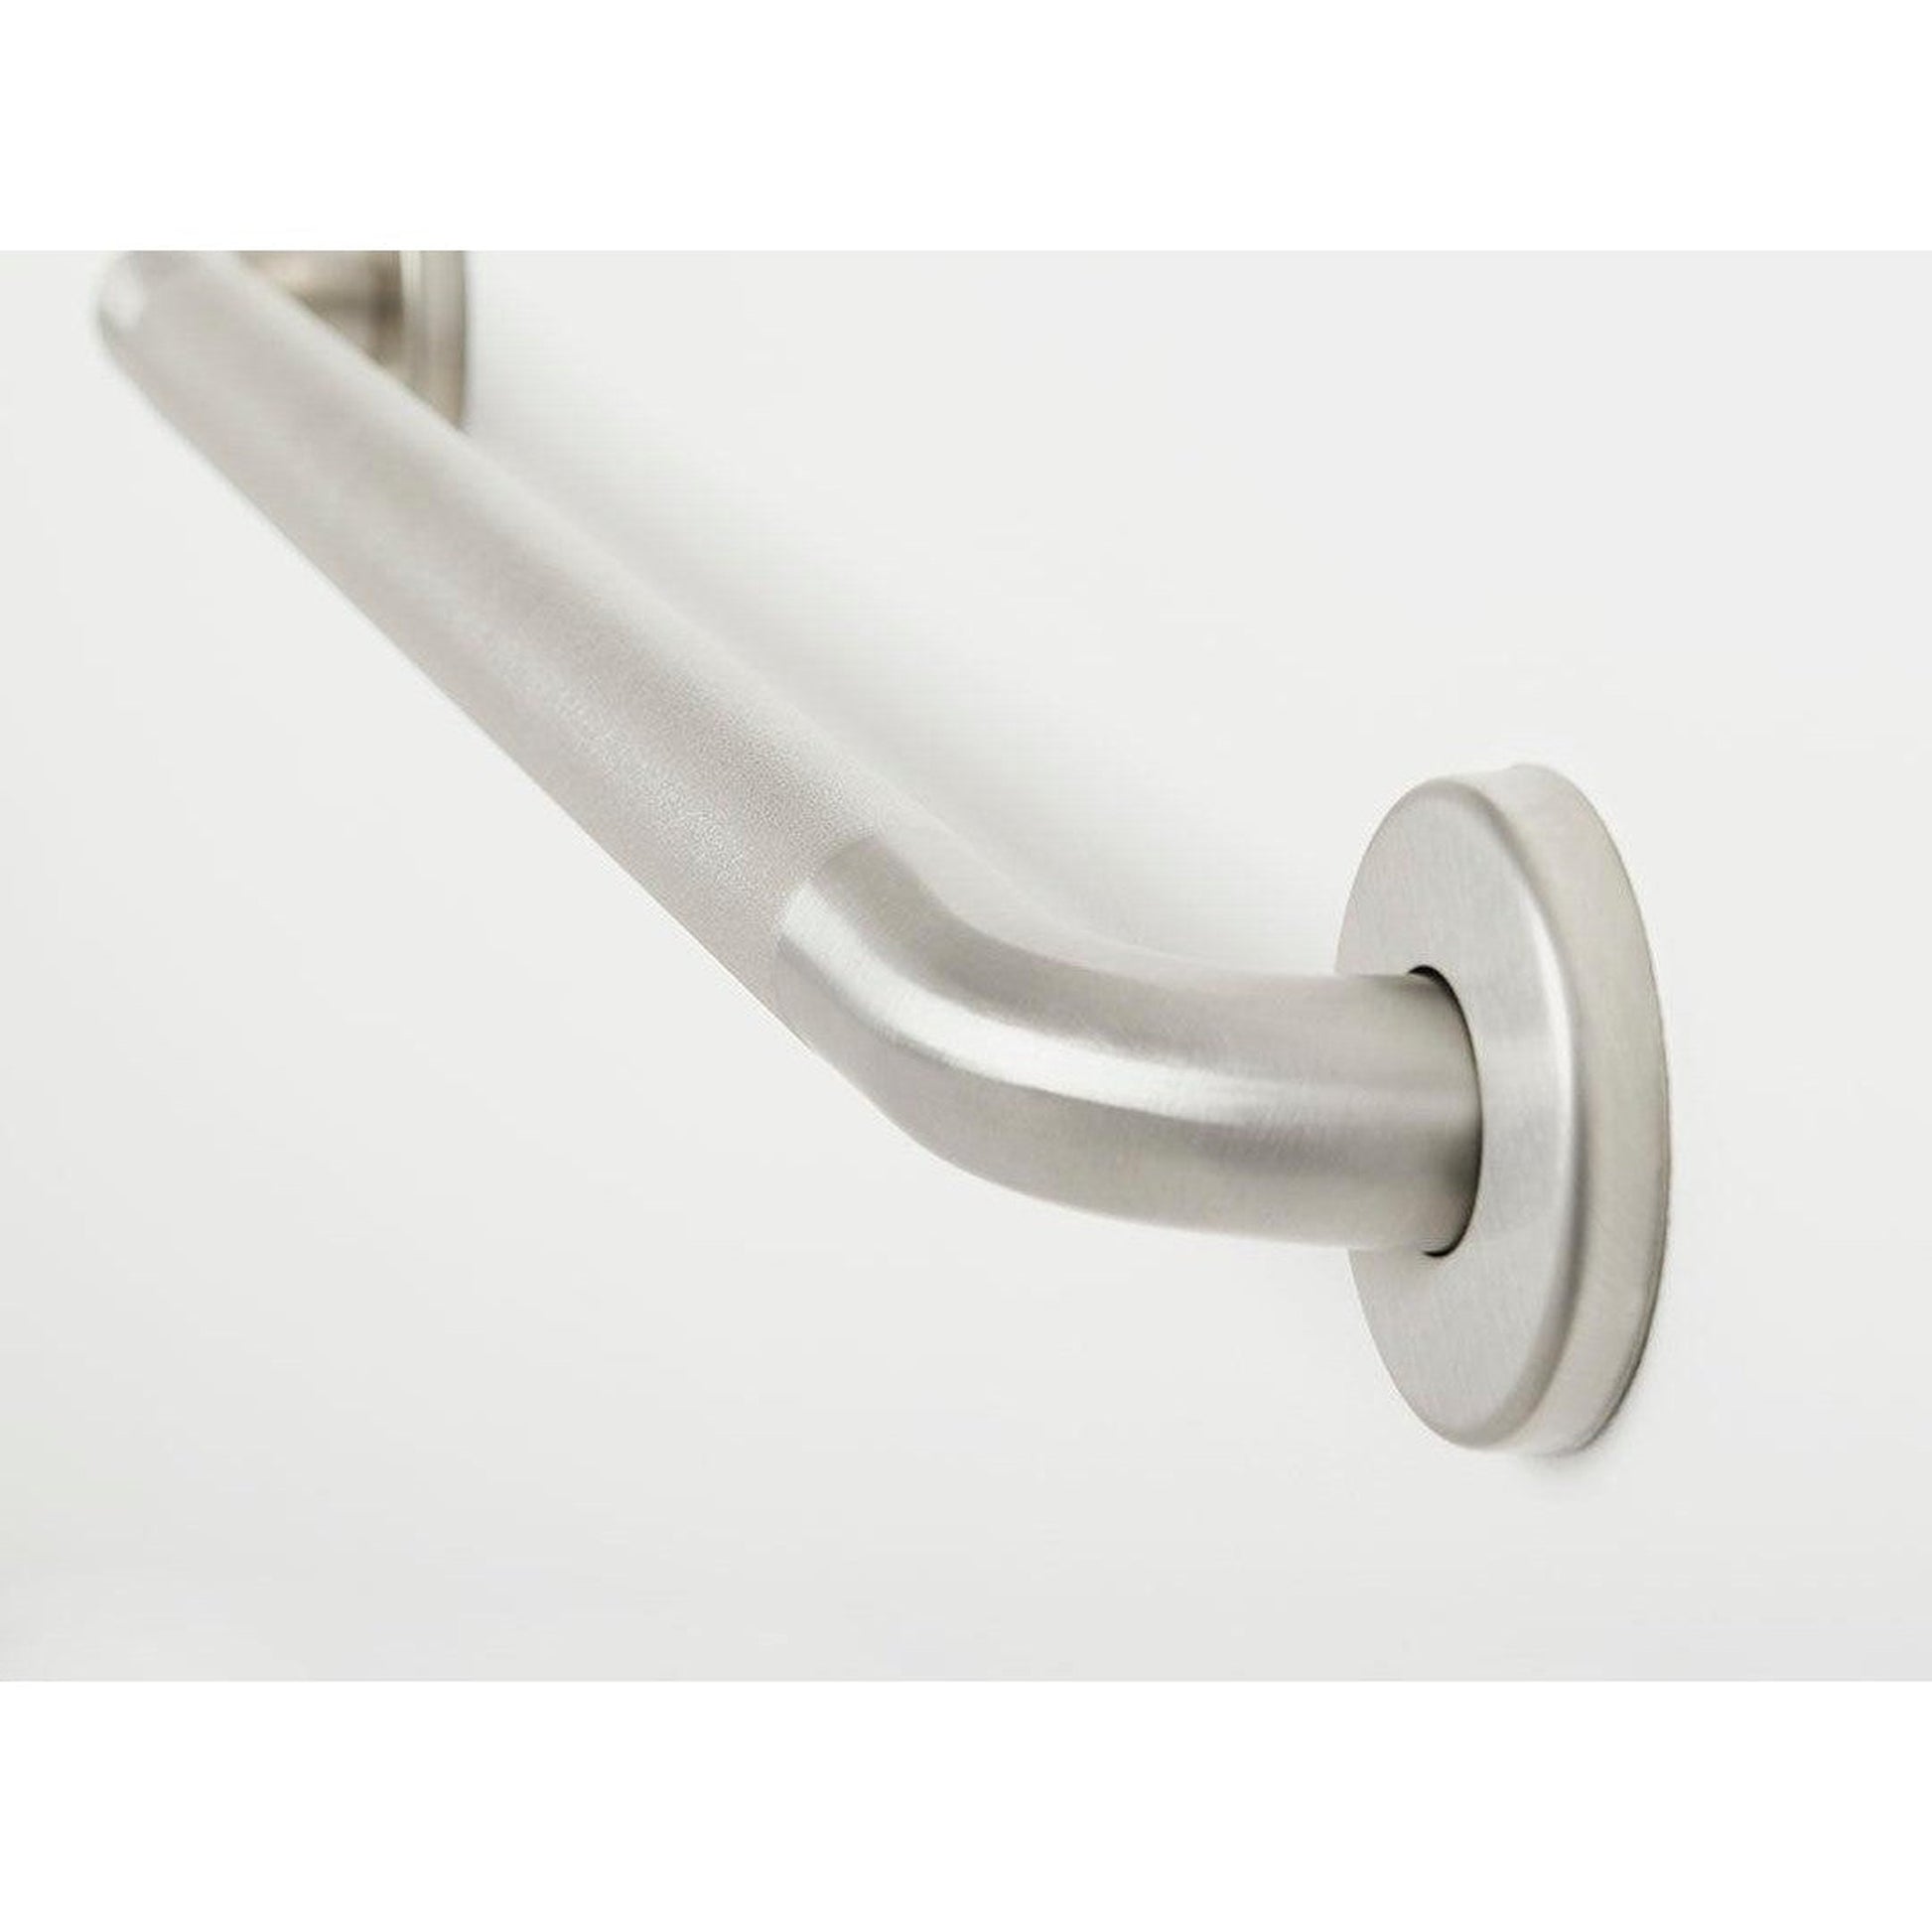 Seachrome Signature Series Value Line 30" Peened Stainless Steel With Satin Ends 1.5" Tube Diameter Straight Concealed Flange Grab Bar